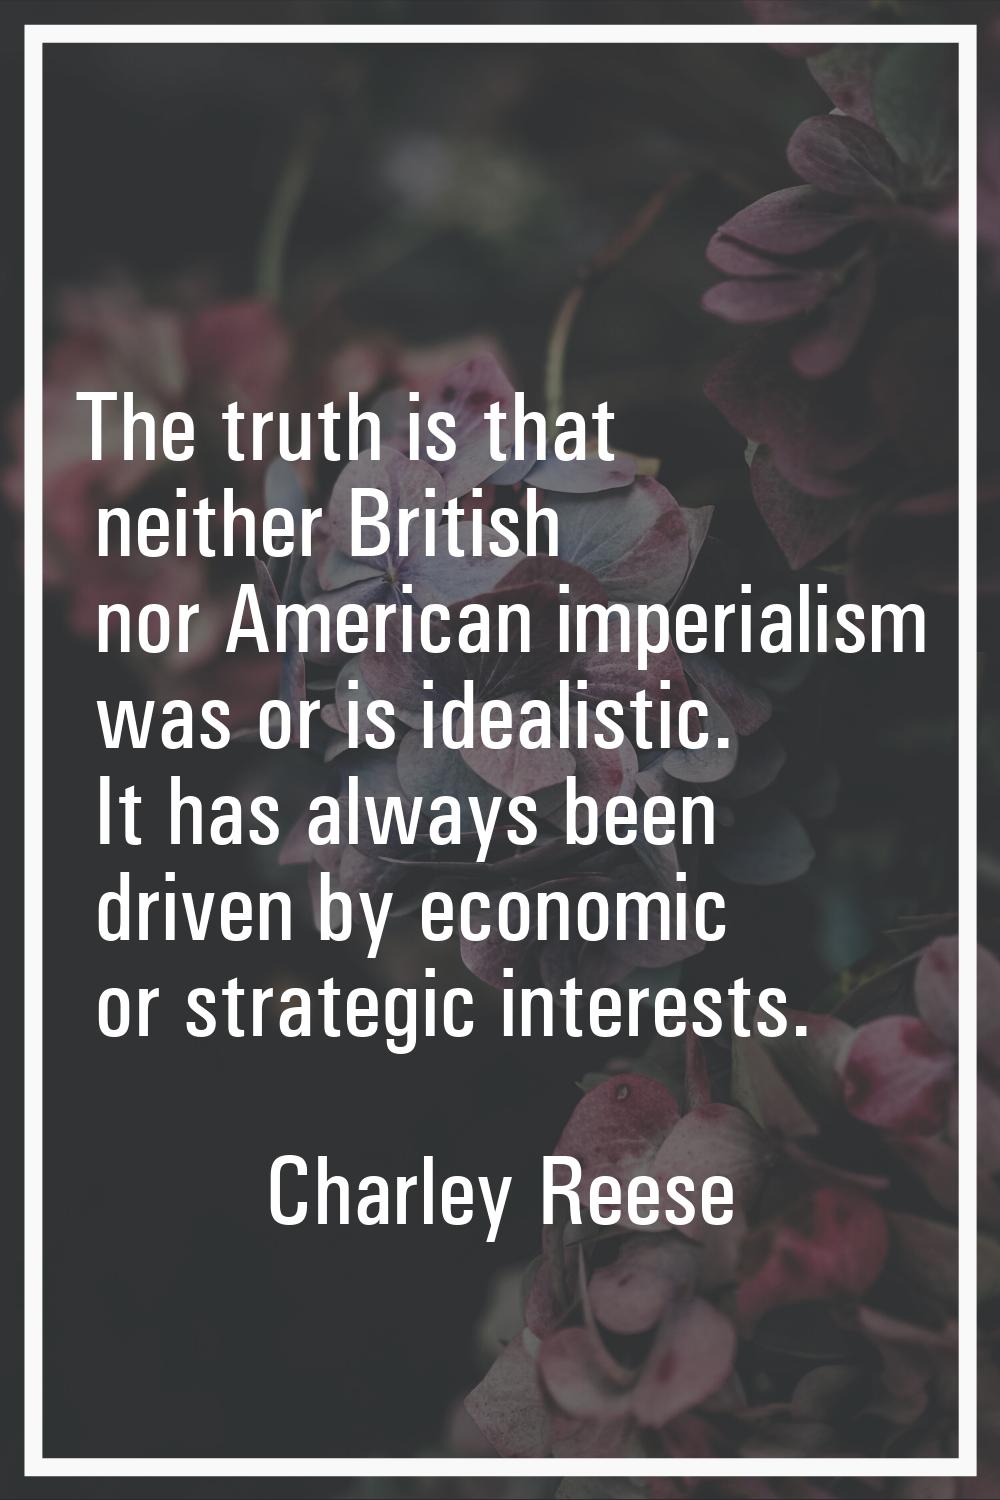 The truth is that neither British nor American imperialism was or is idealistic. It has always been